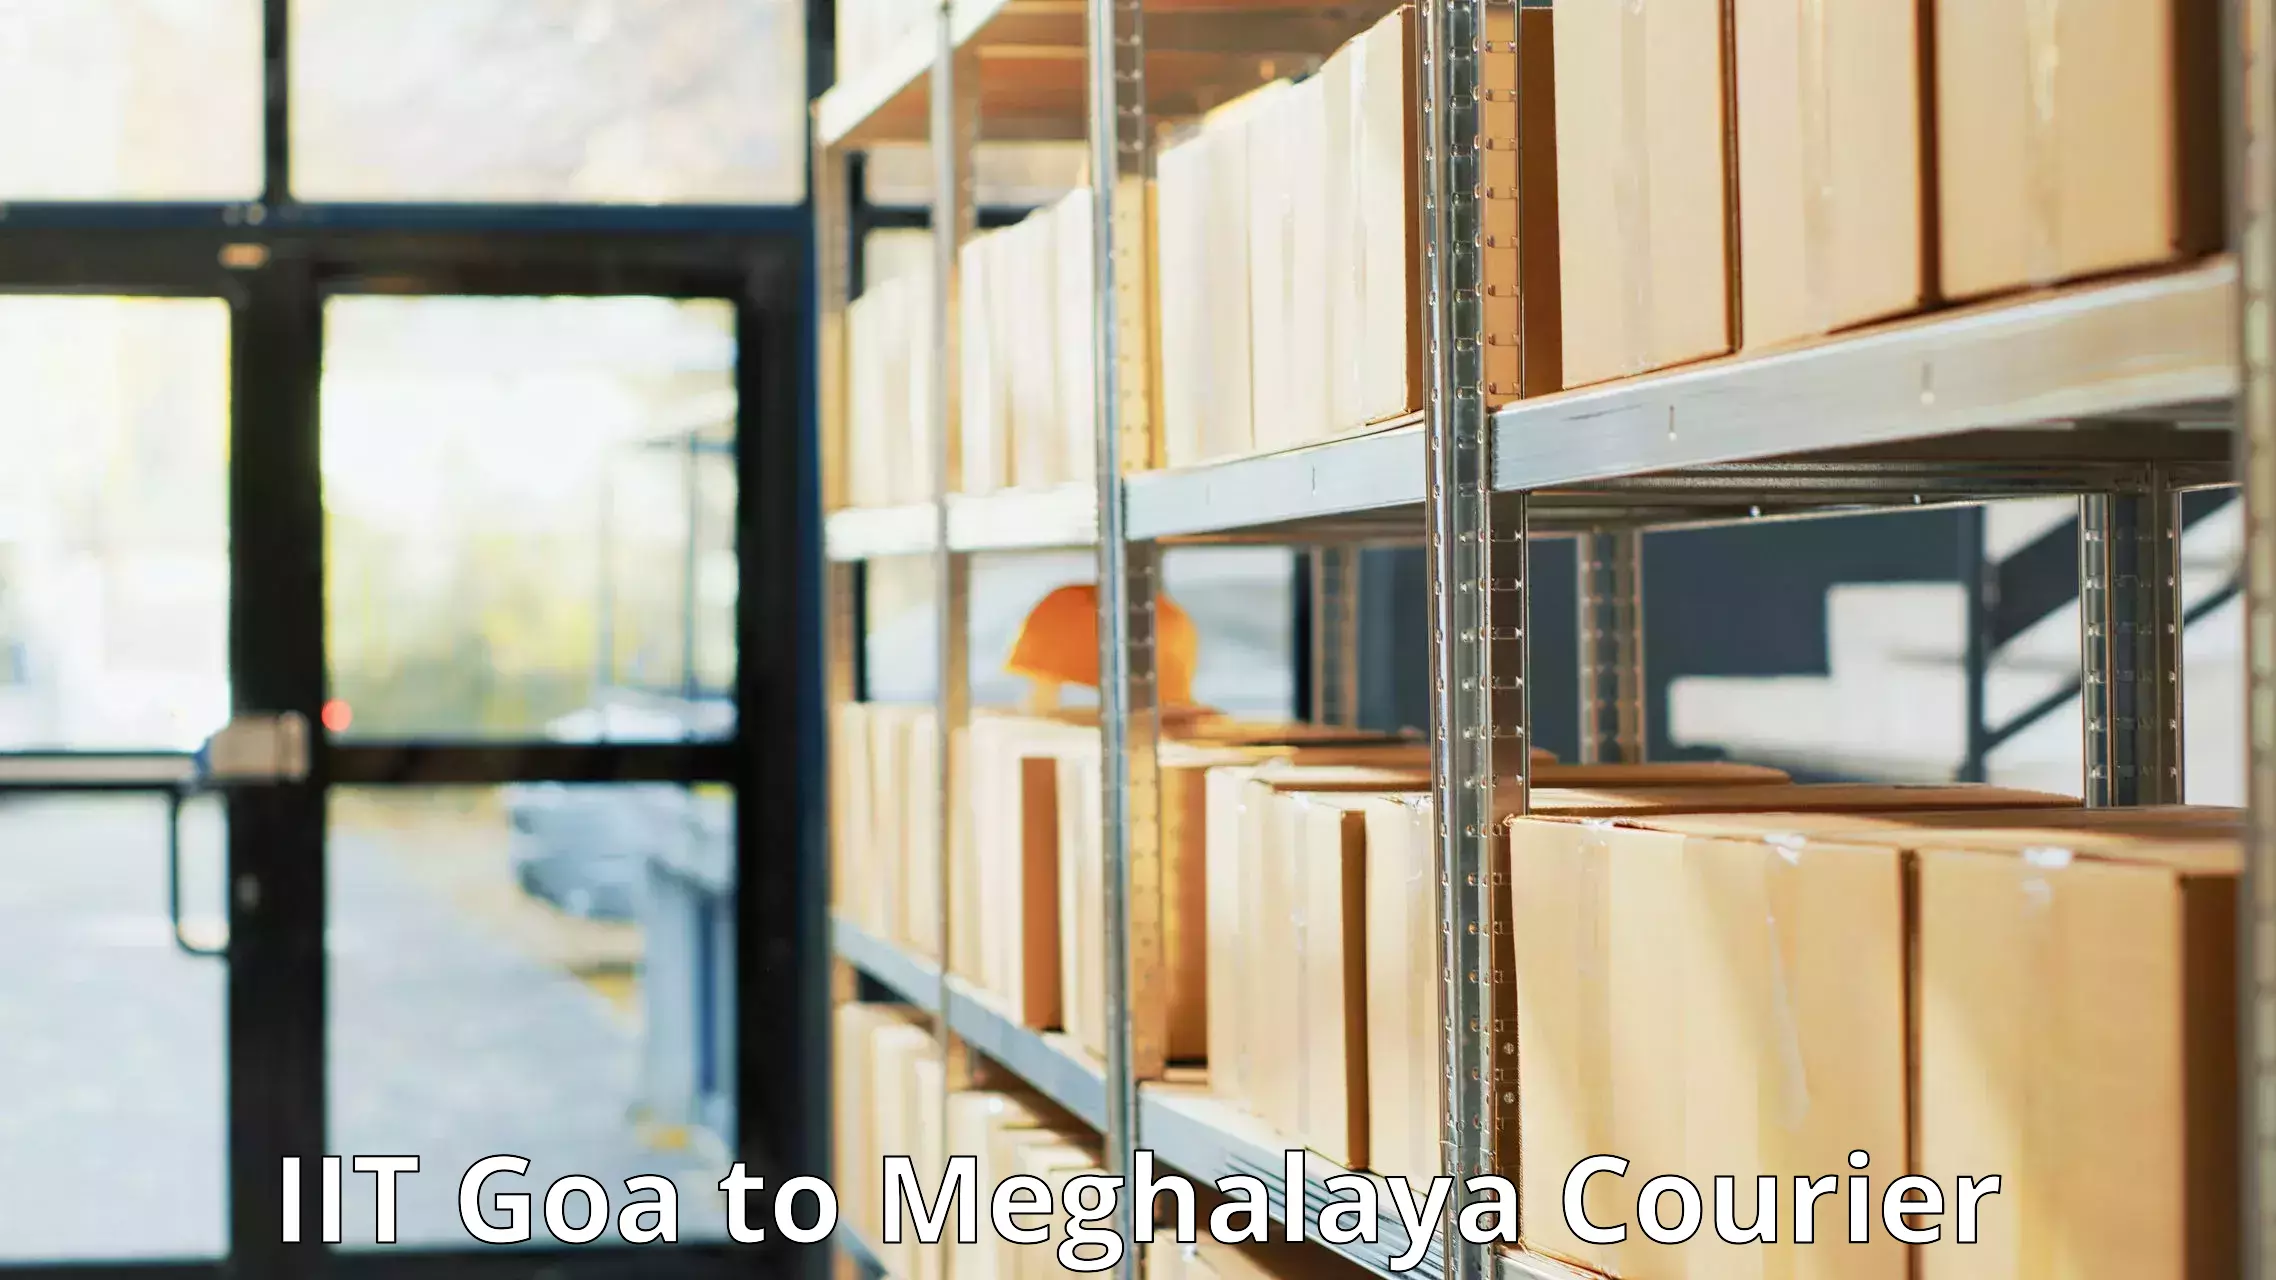 Courier service comparison in IIT Goa to Umsaw